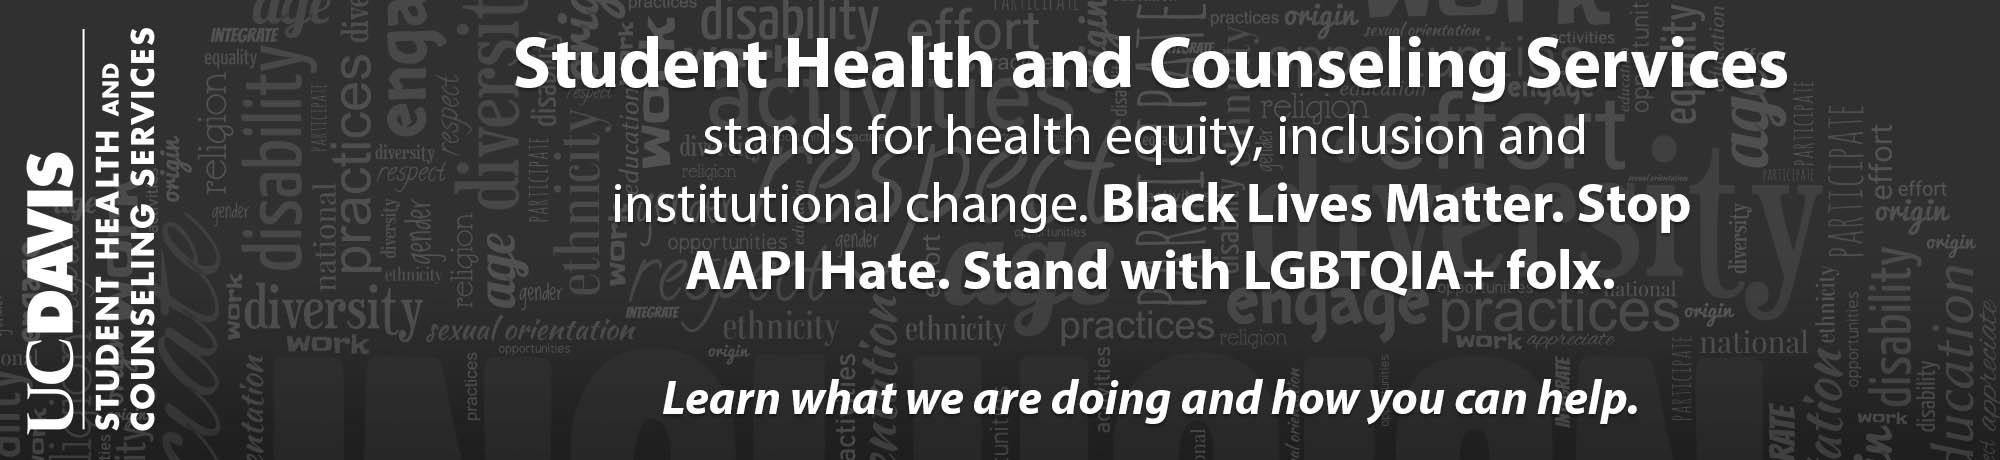 Support Health Equity, Inclusion and Institutional Change